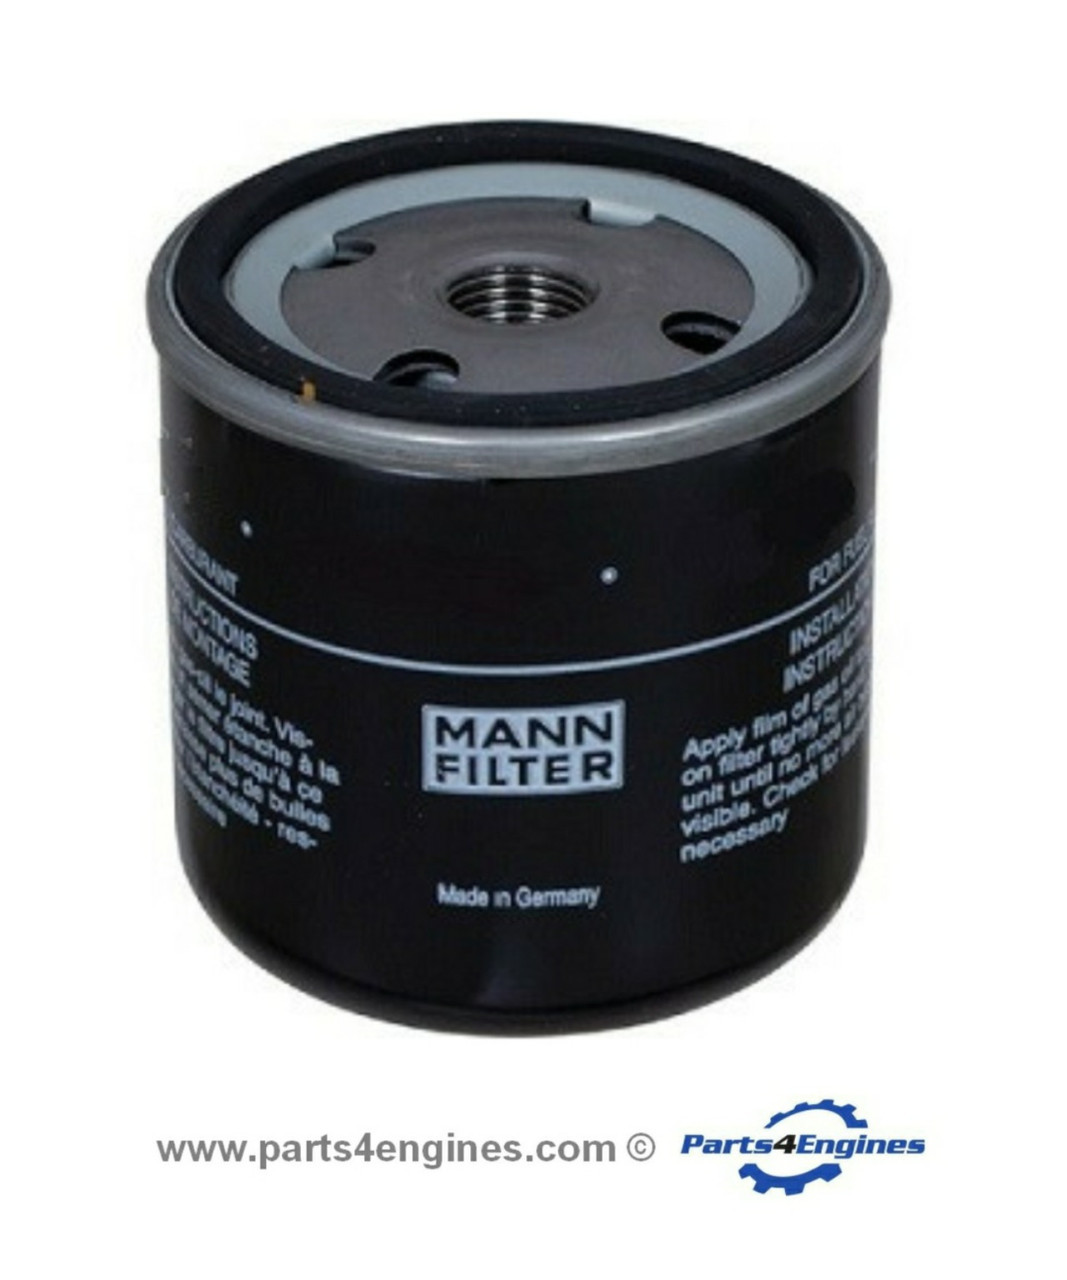 Volvo Penta 2003 fuel filter from Parts4engines.com